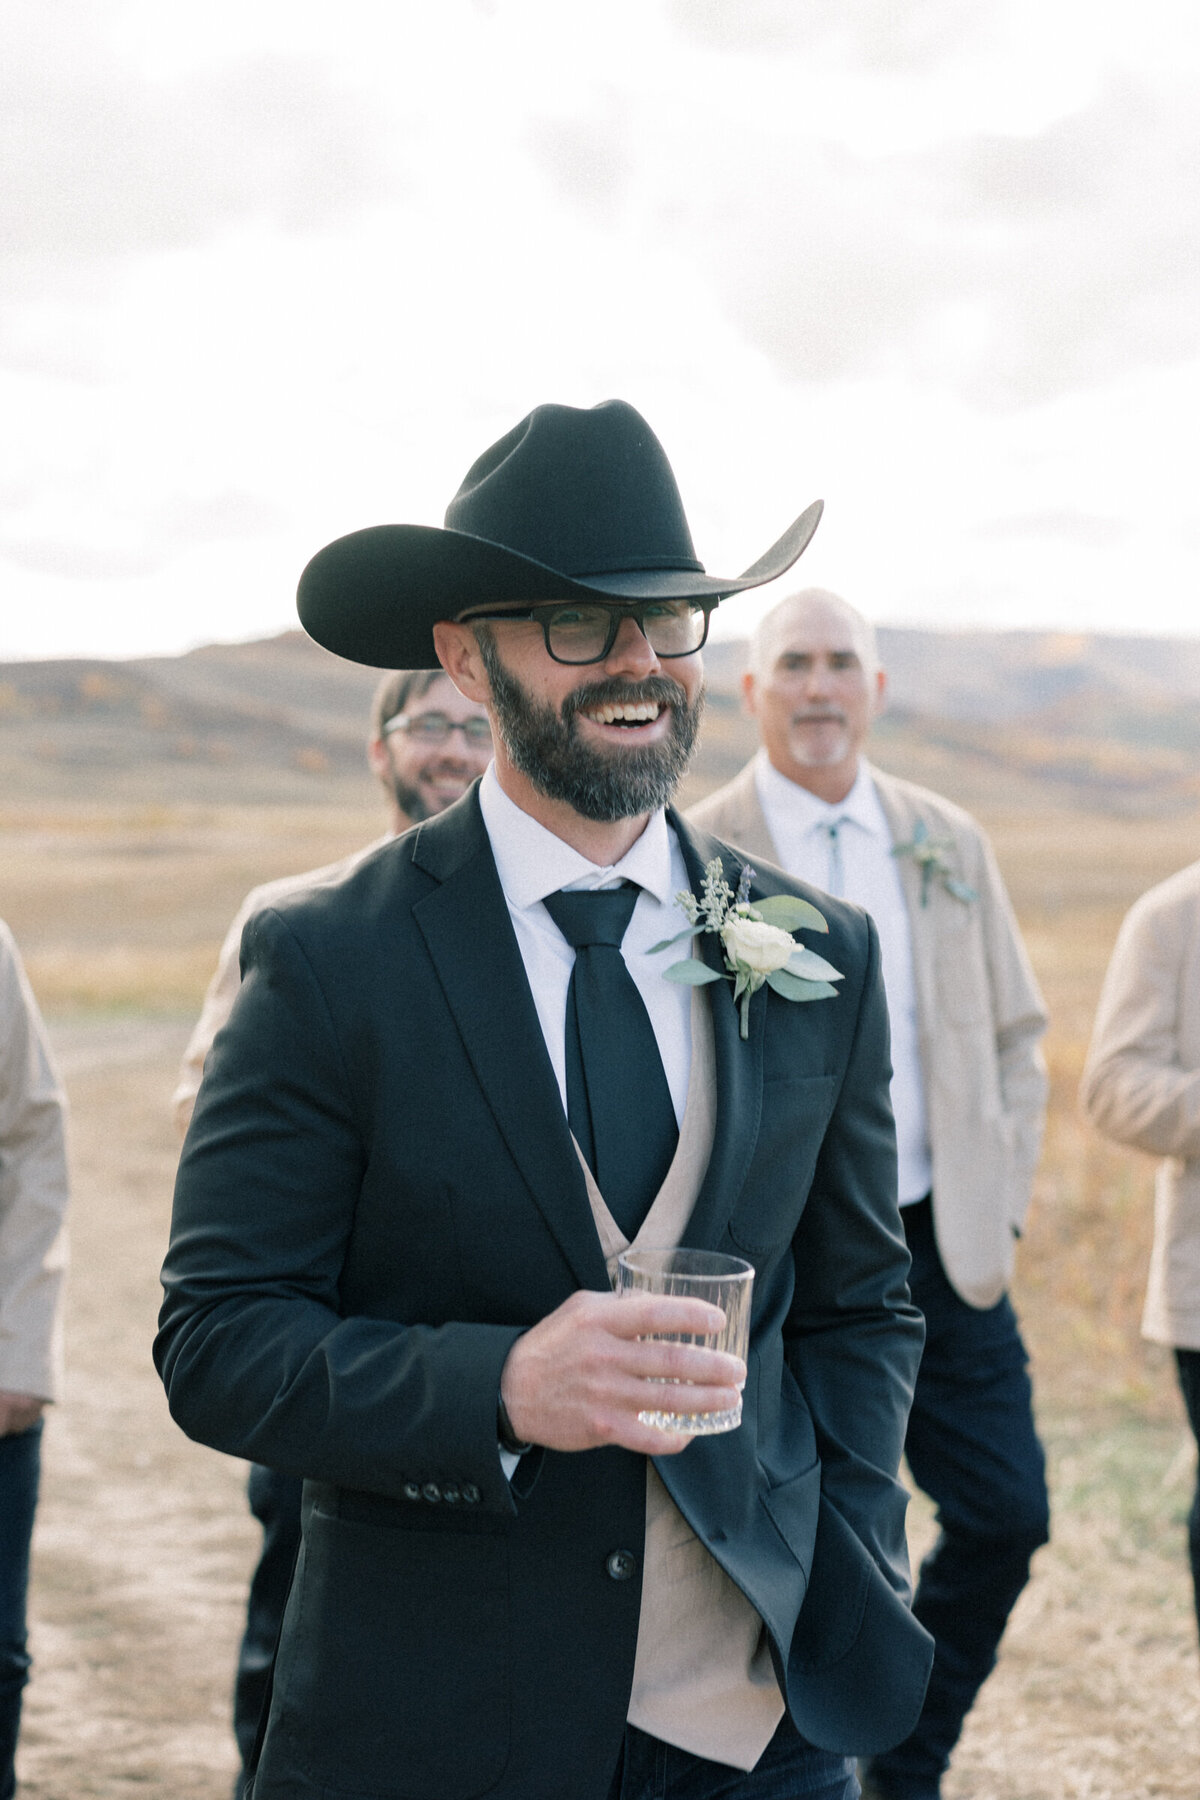 Steamboat_Springs_Ranch_wedding_Mary_Ann_craddock_photography_0022